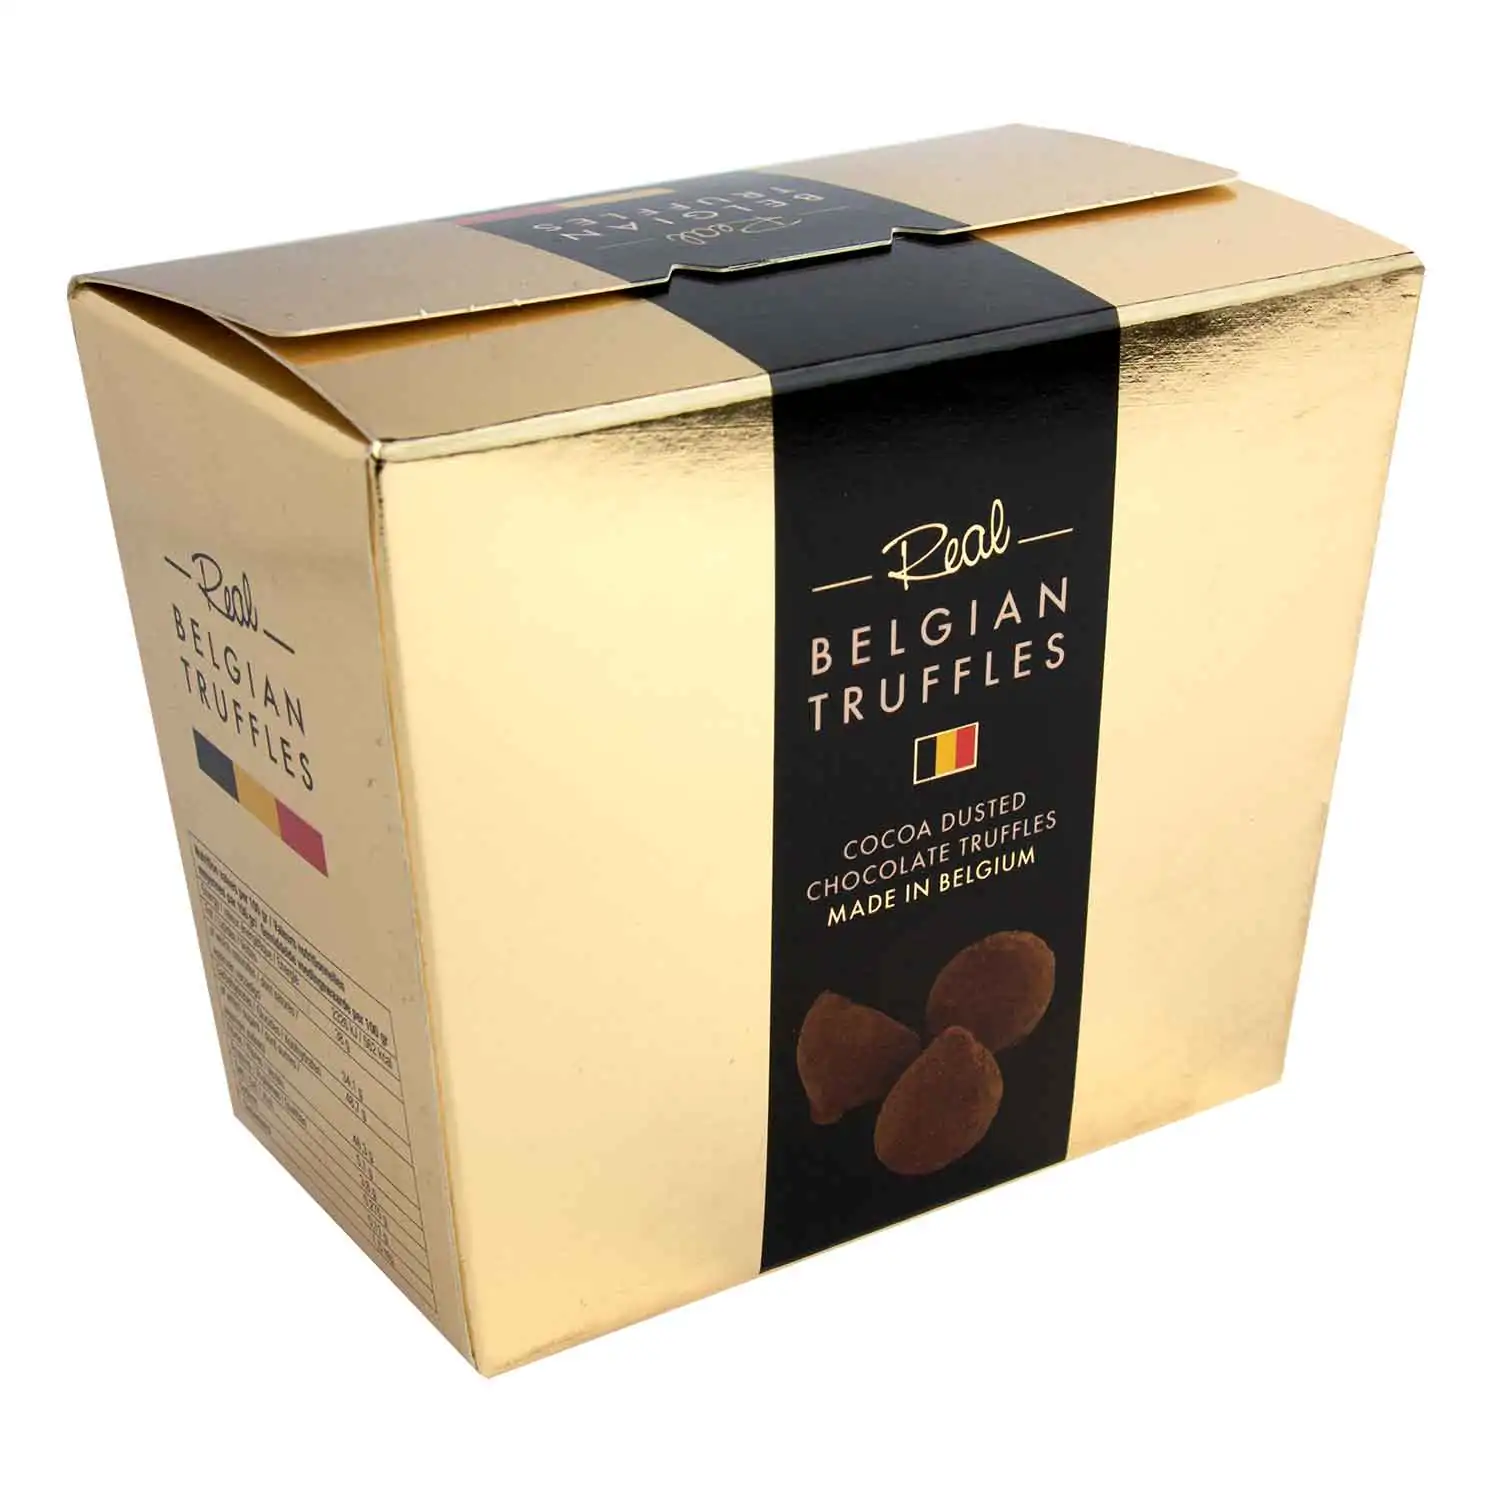 Real belgian truffes cocoa 175g - Buy at Real Tobacco